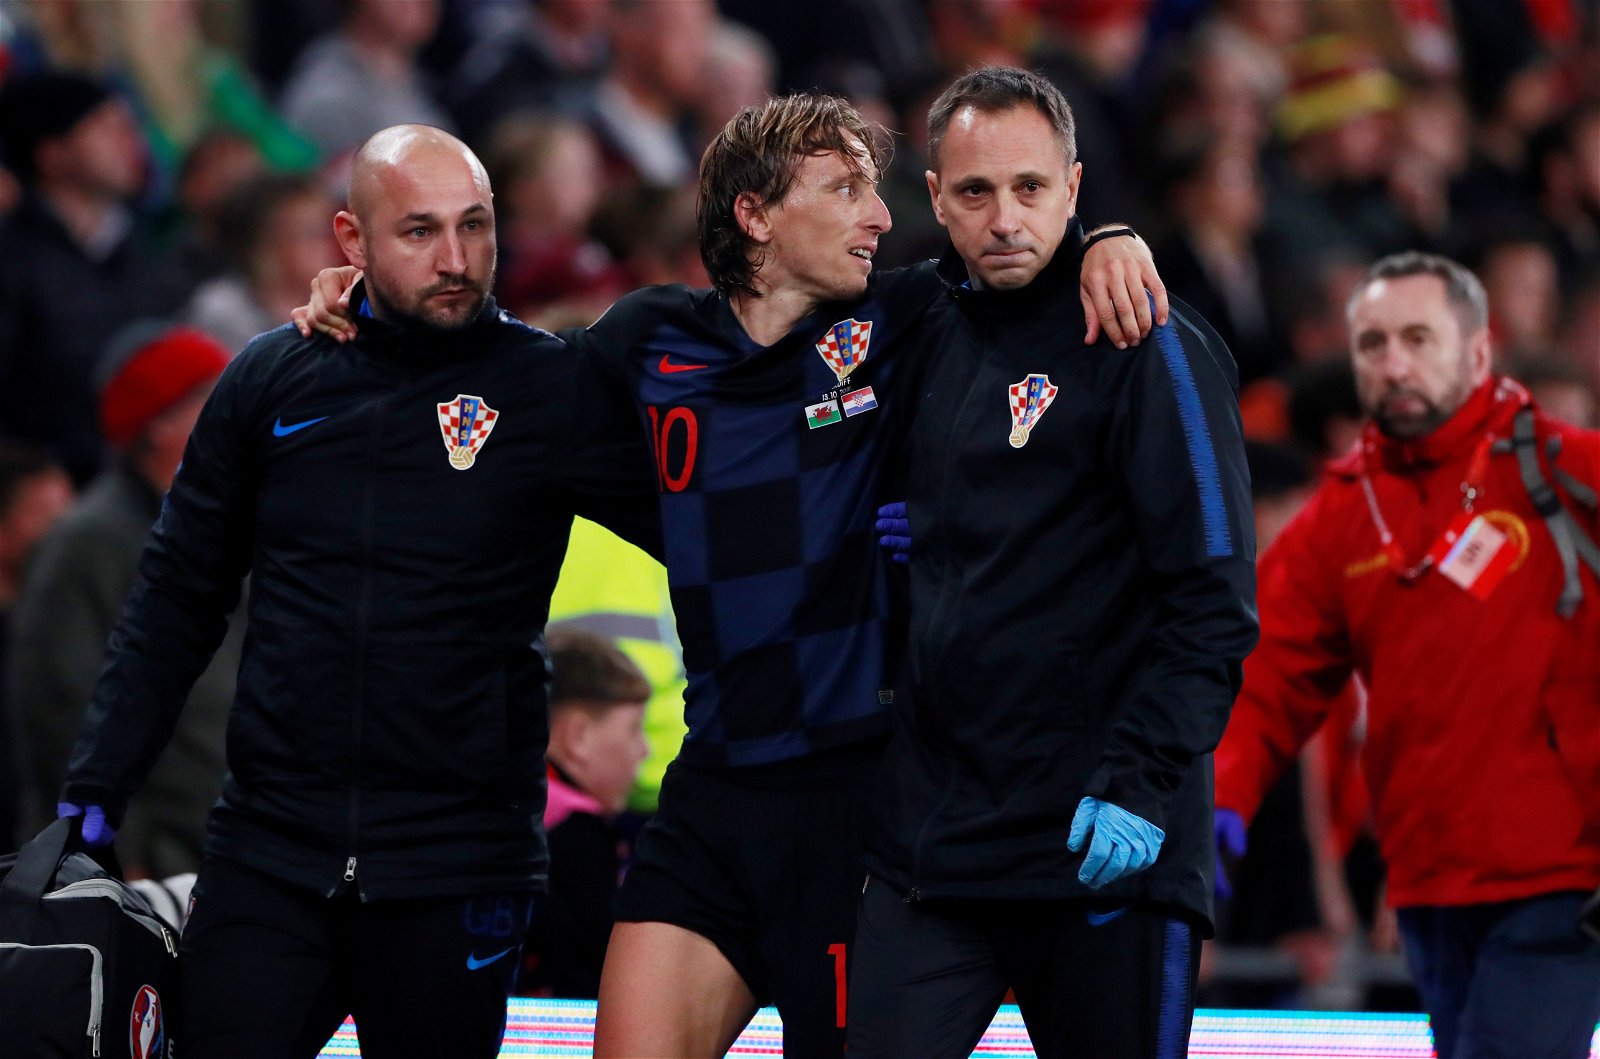 Real Madrid confirm Luka Modric sidelined with muscle injury